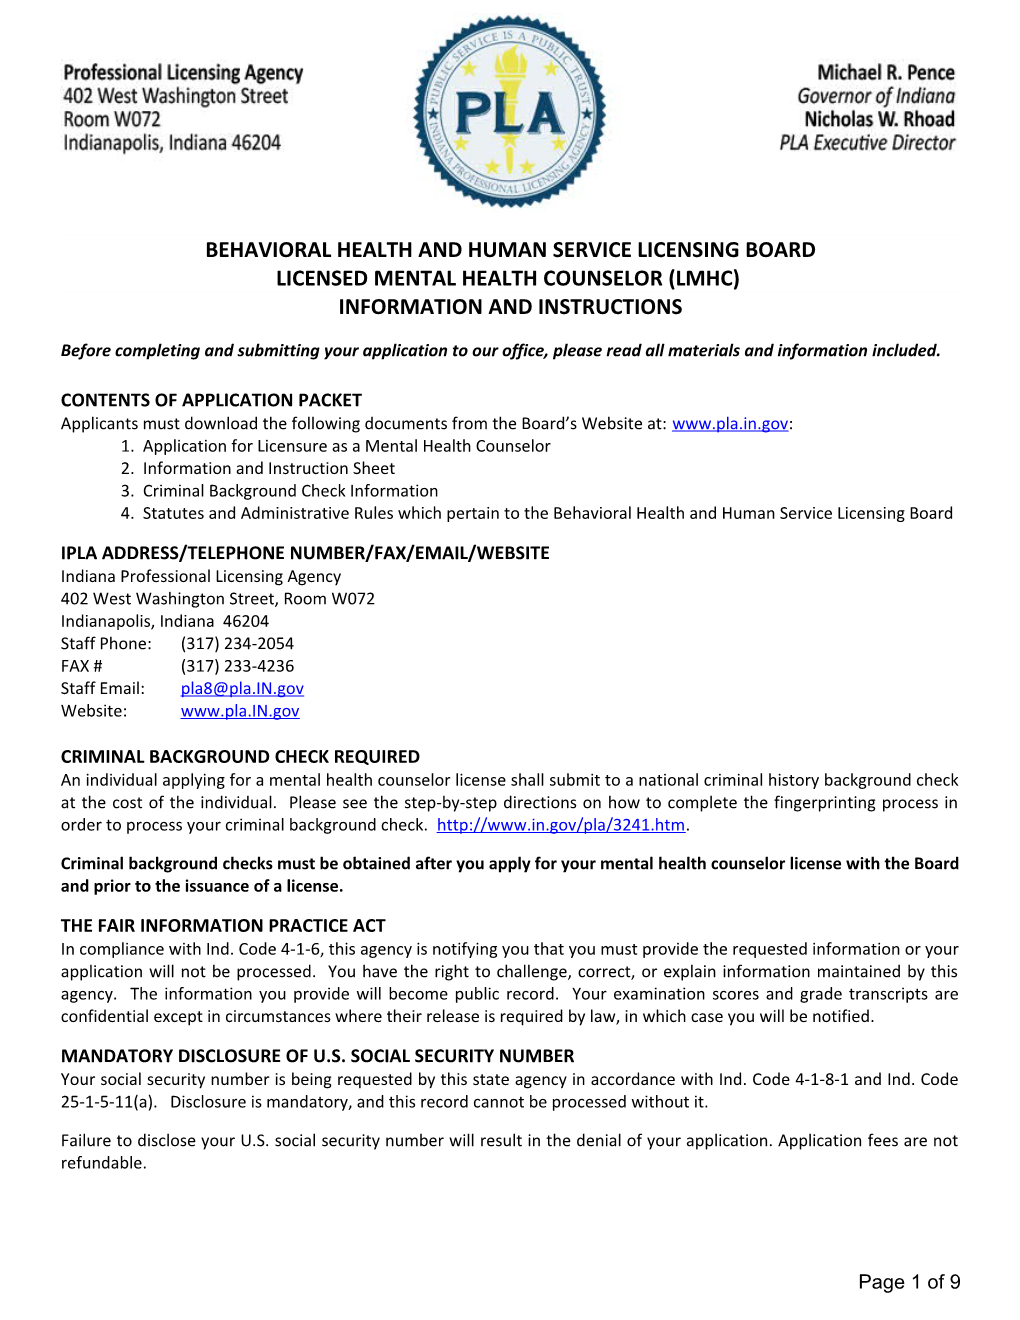 Behavioral Health and Human Service Licensing Board